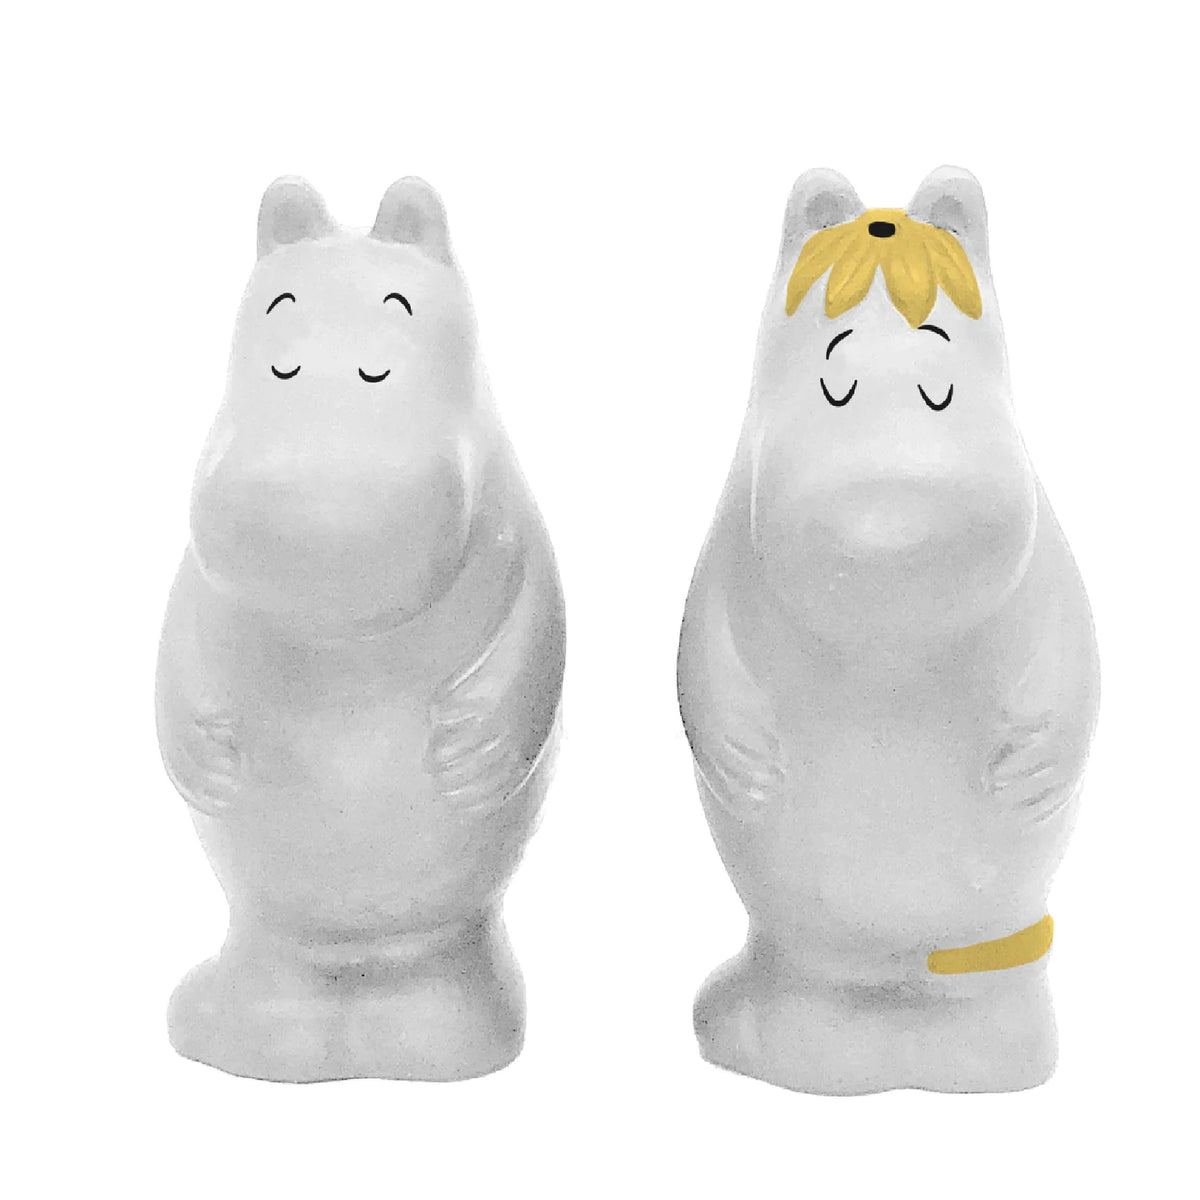 Salt and Pepper Shaker Moomintroll and Snorkmaiden